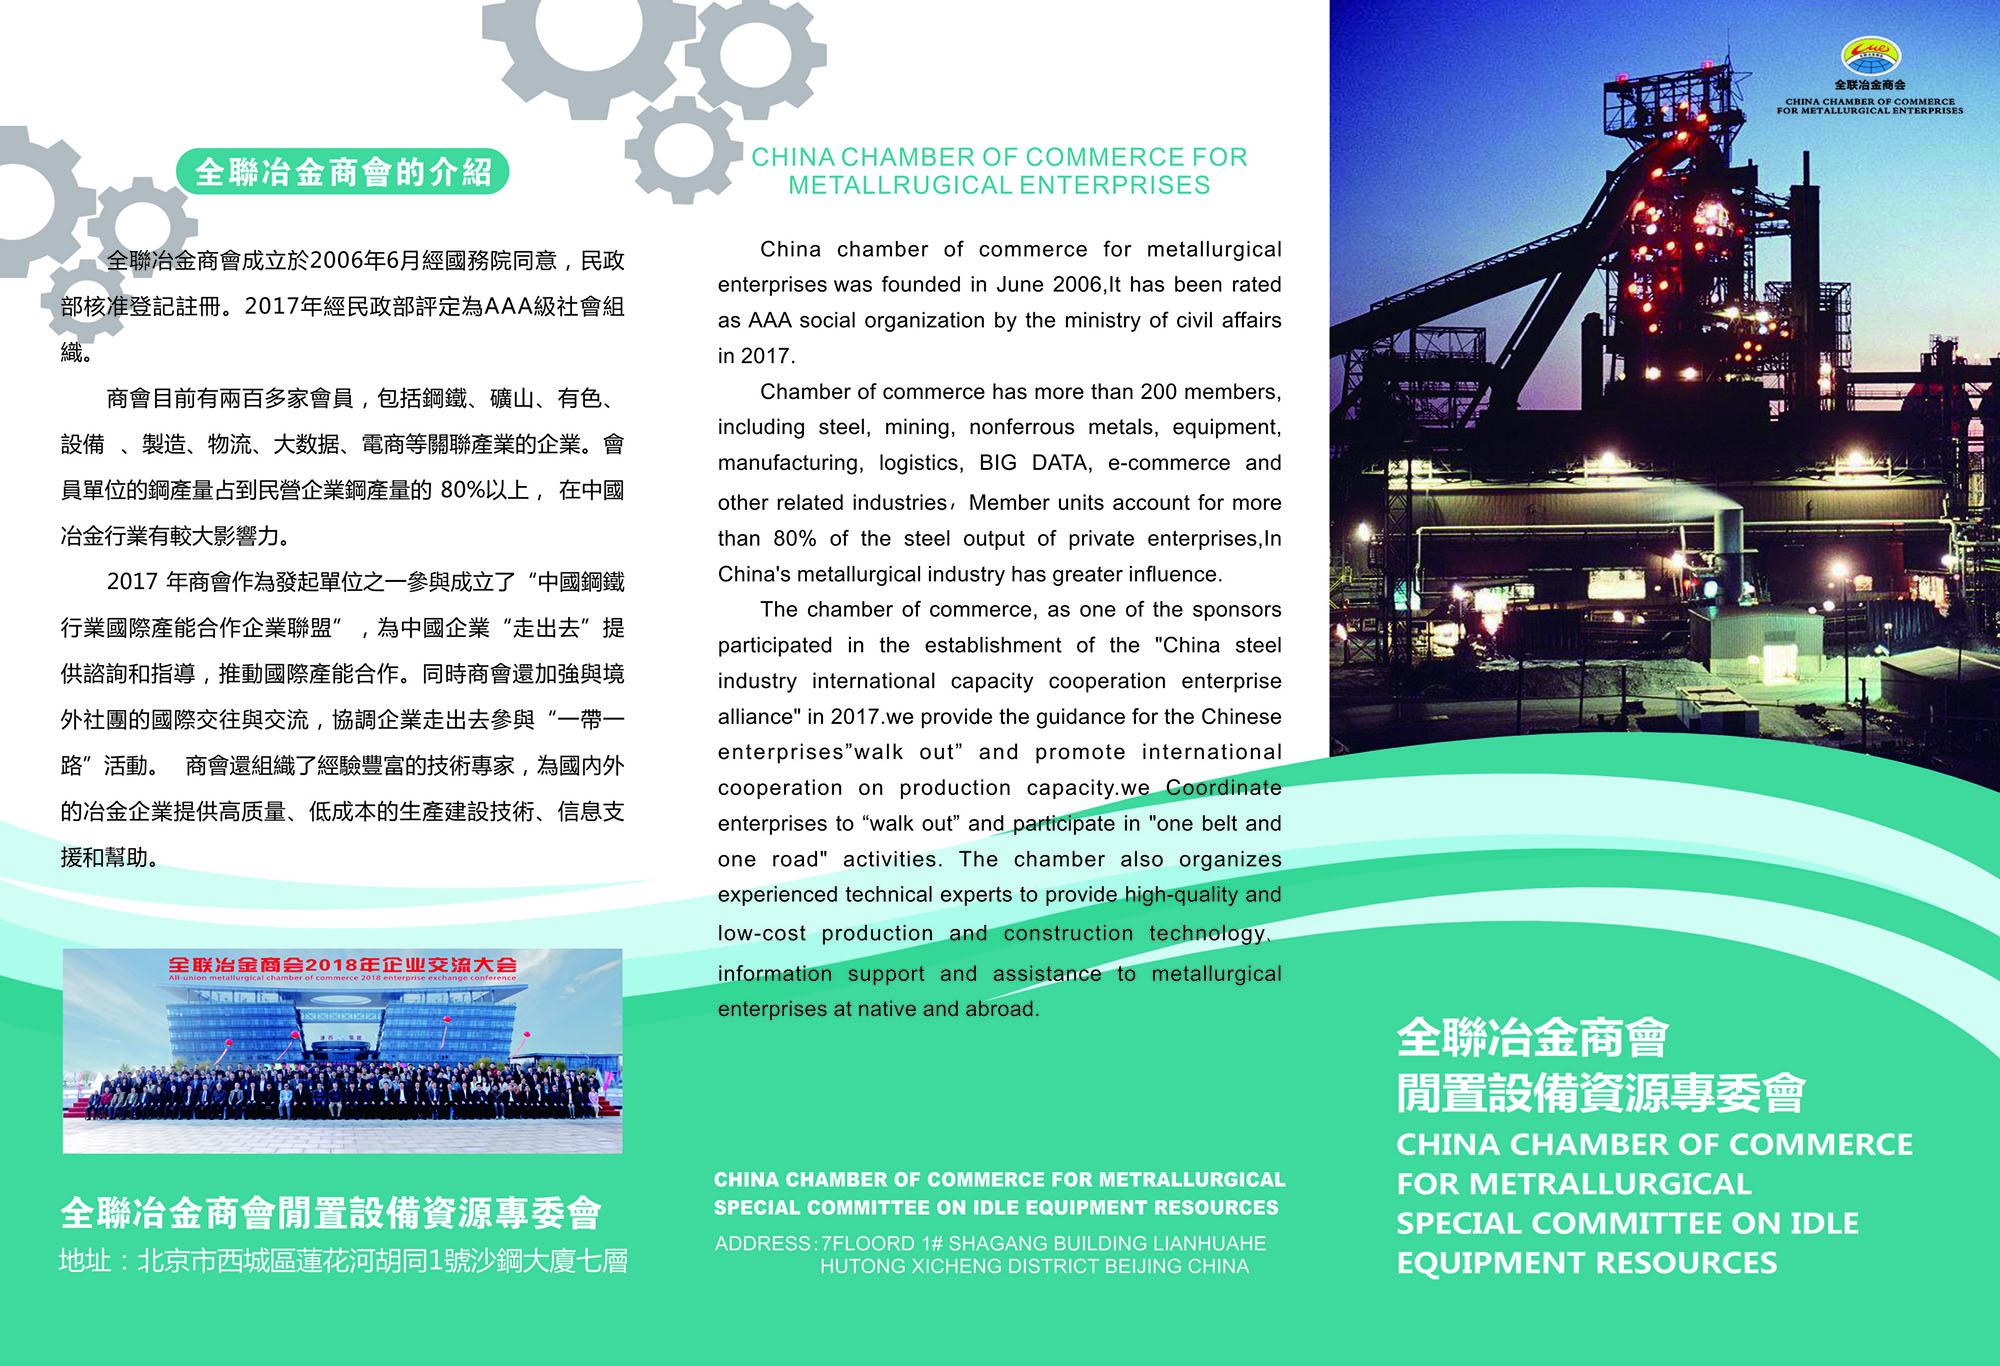 CHINA CHAMBER OF COMMERCE FOR METALLRUGICAL